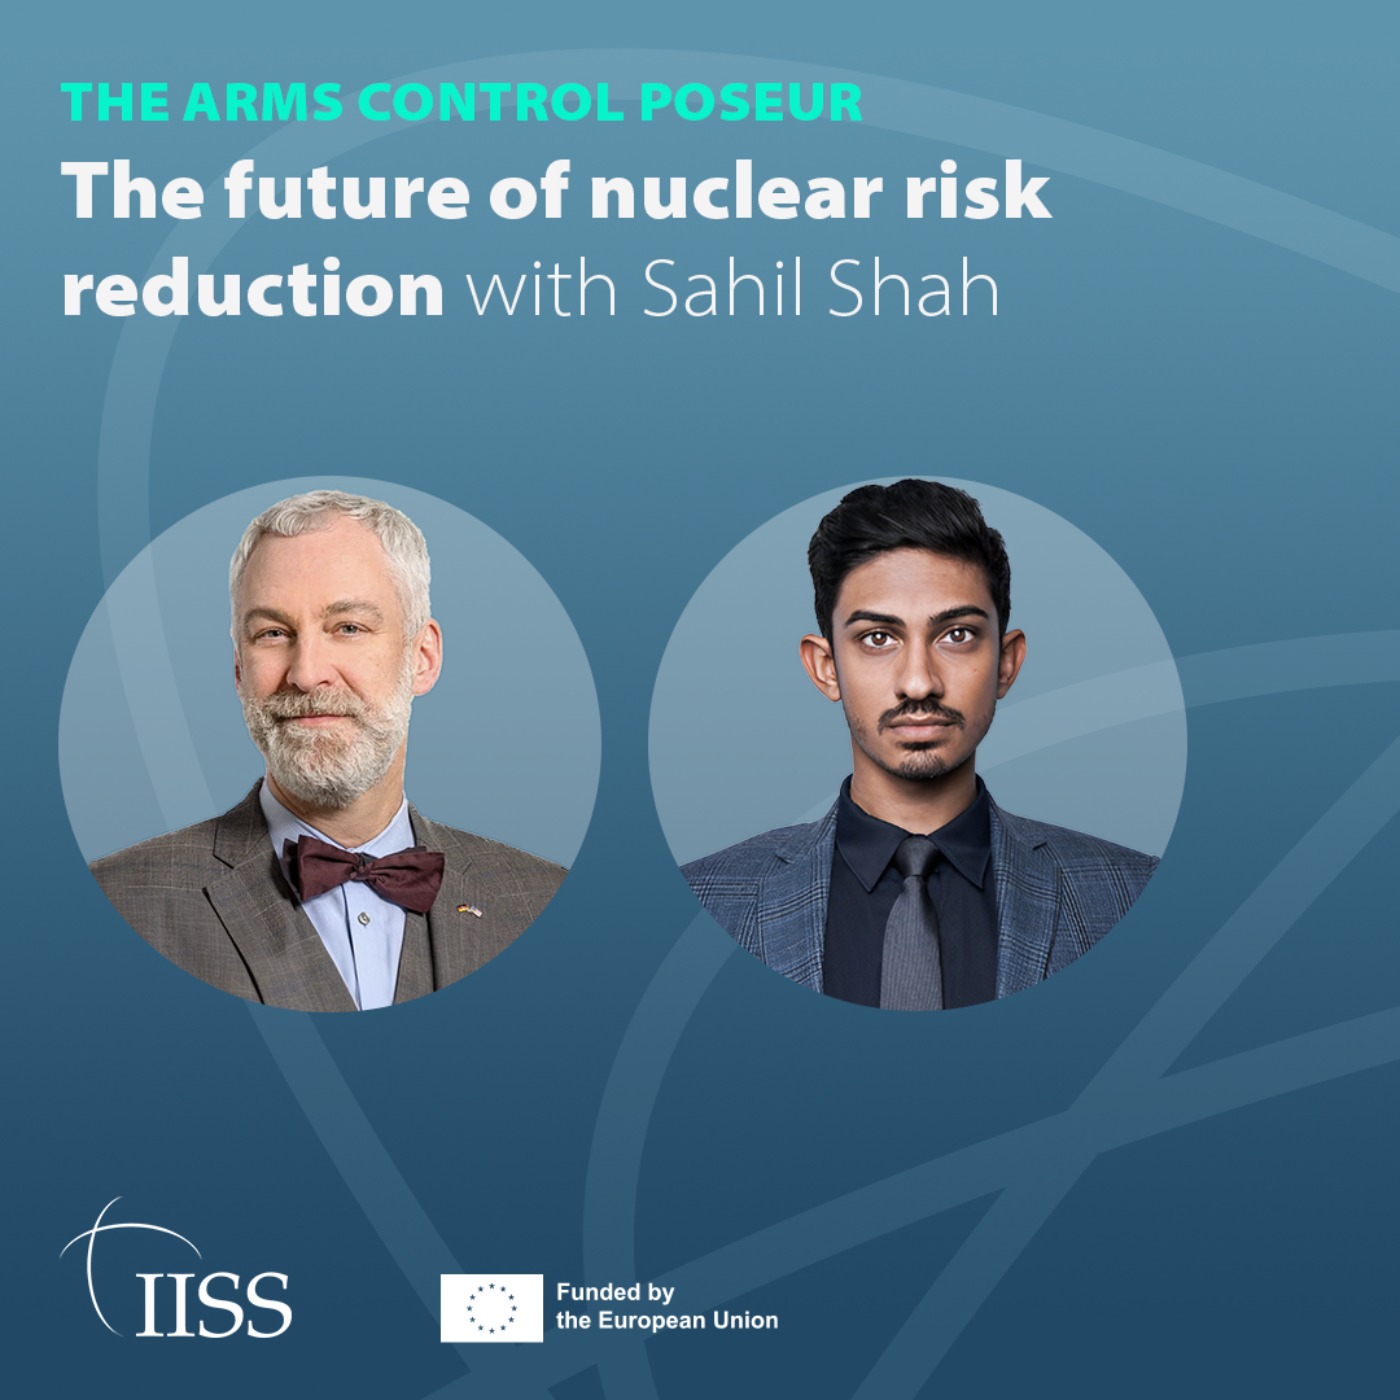 The future of nuclear risk reduction with Sahil Shah